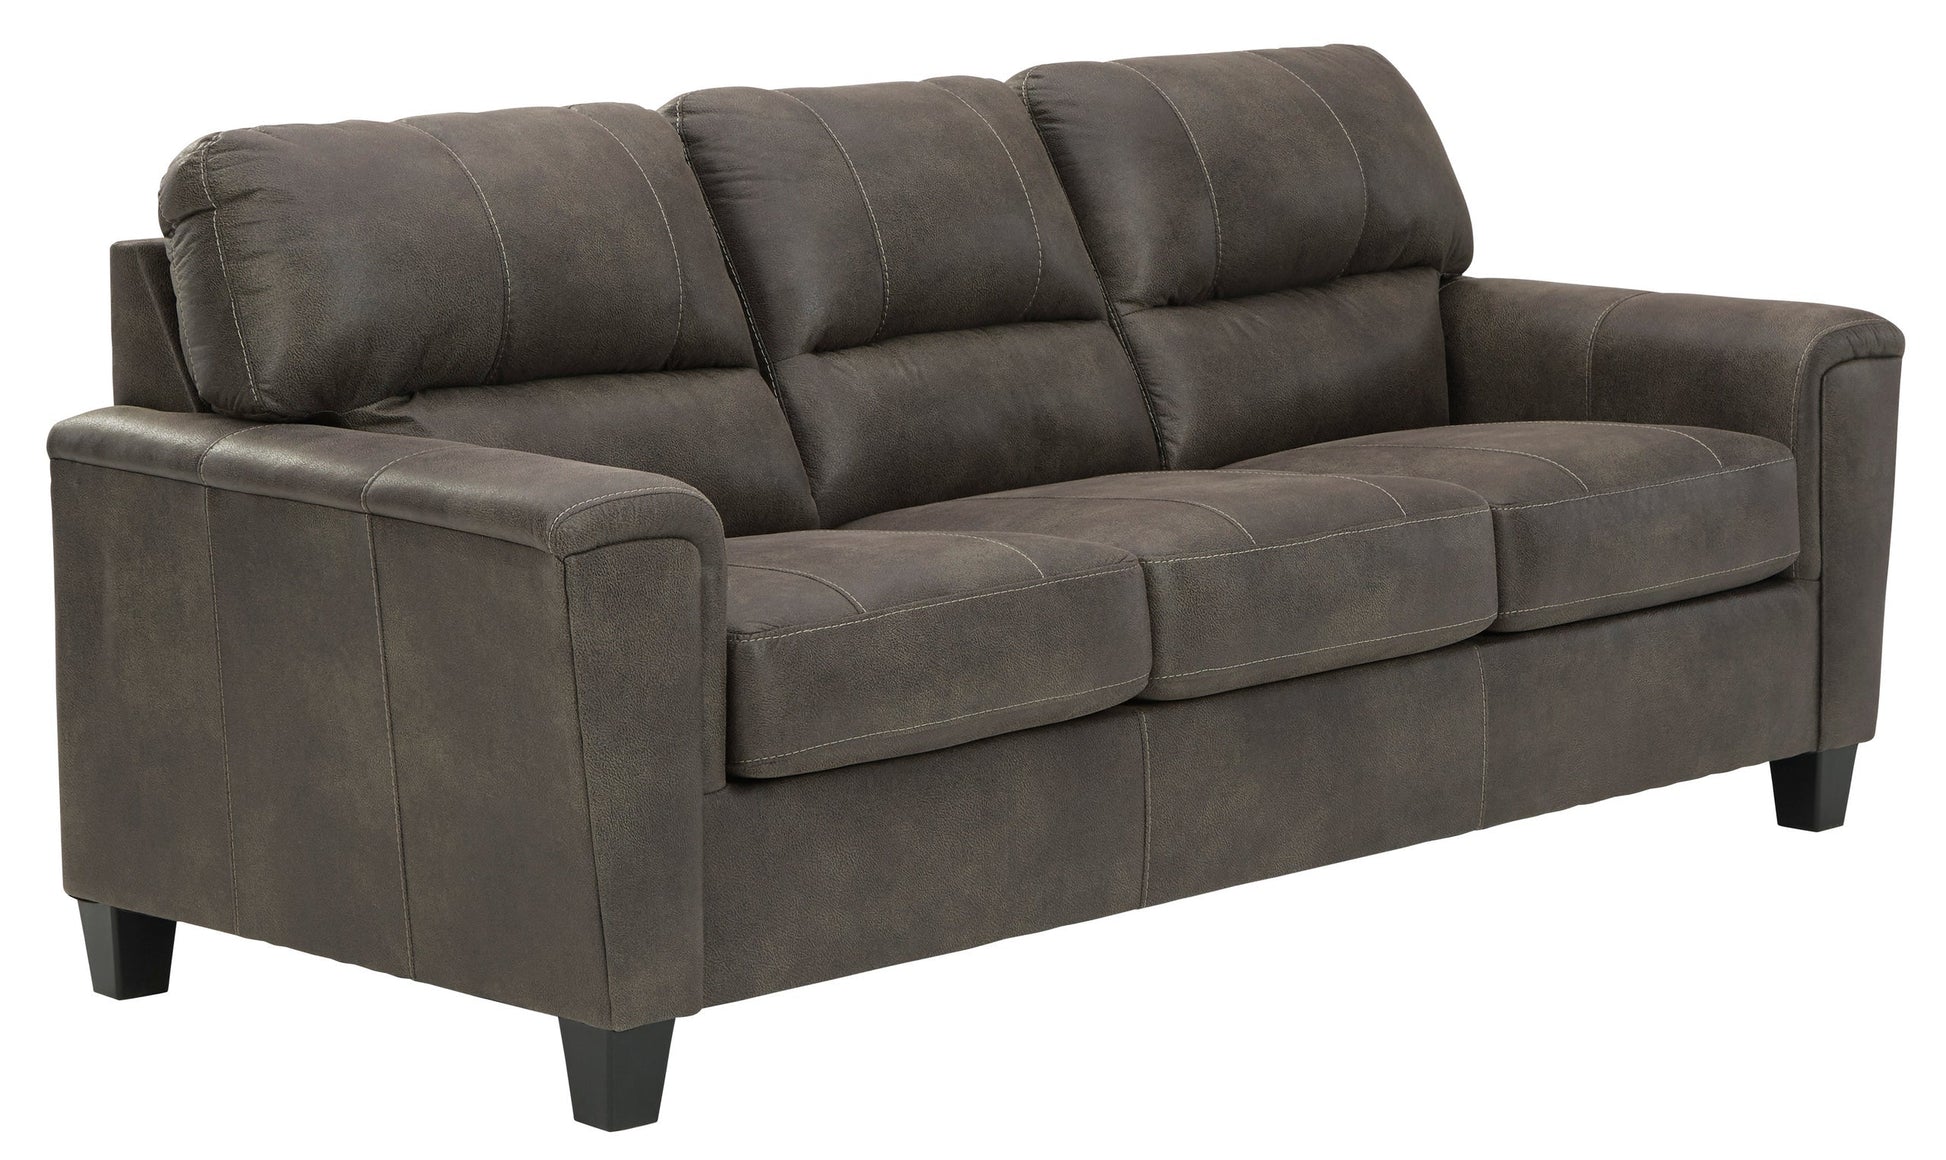 Smoke Modern Contemporary Faux Wood Faux Leather/Fabric Upholstered Queen Sofa Sleeper